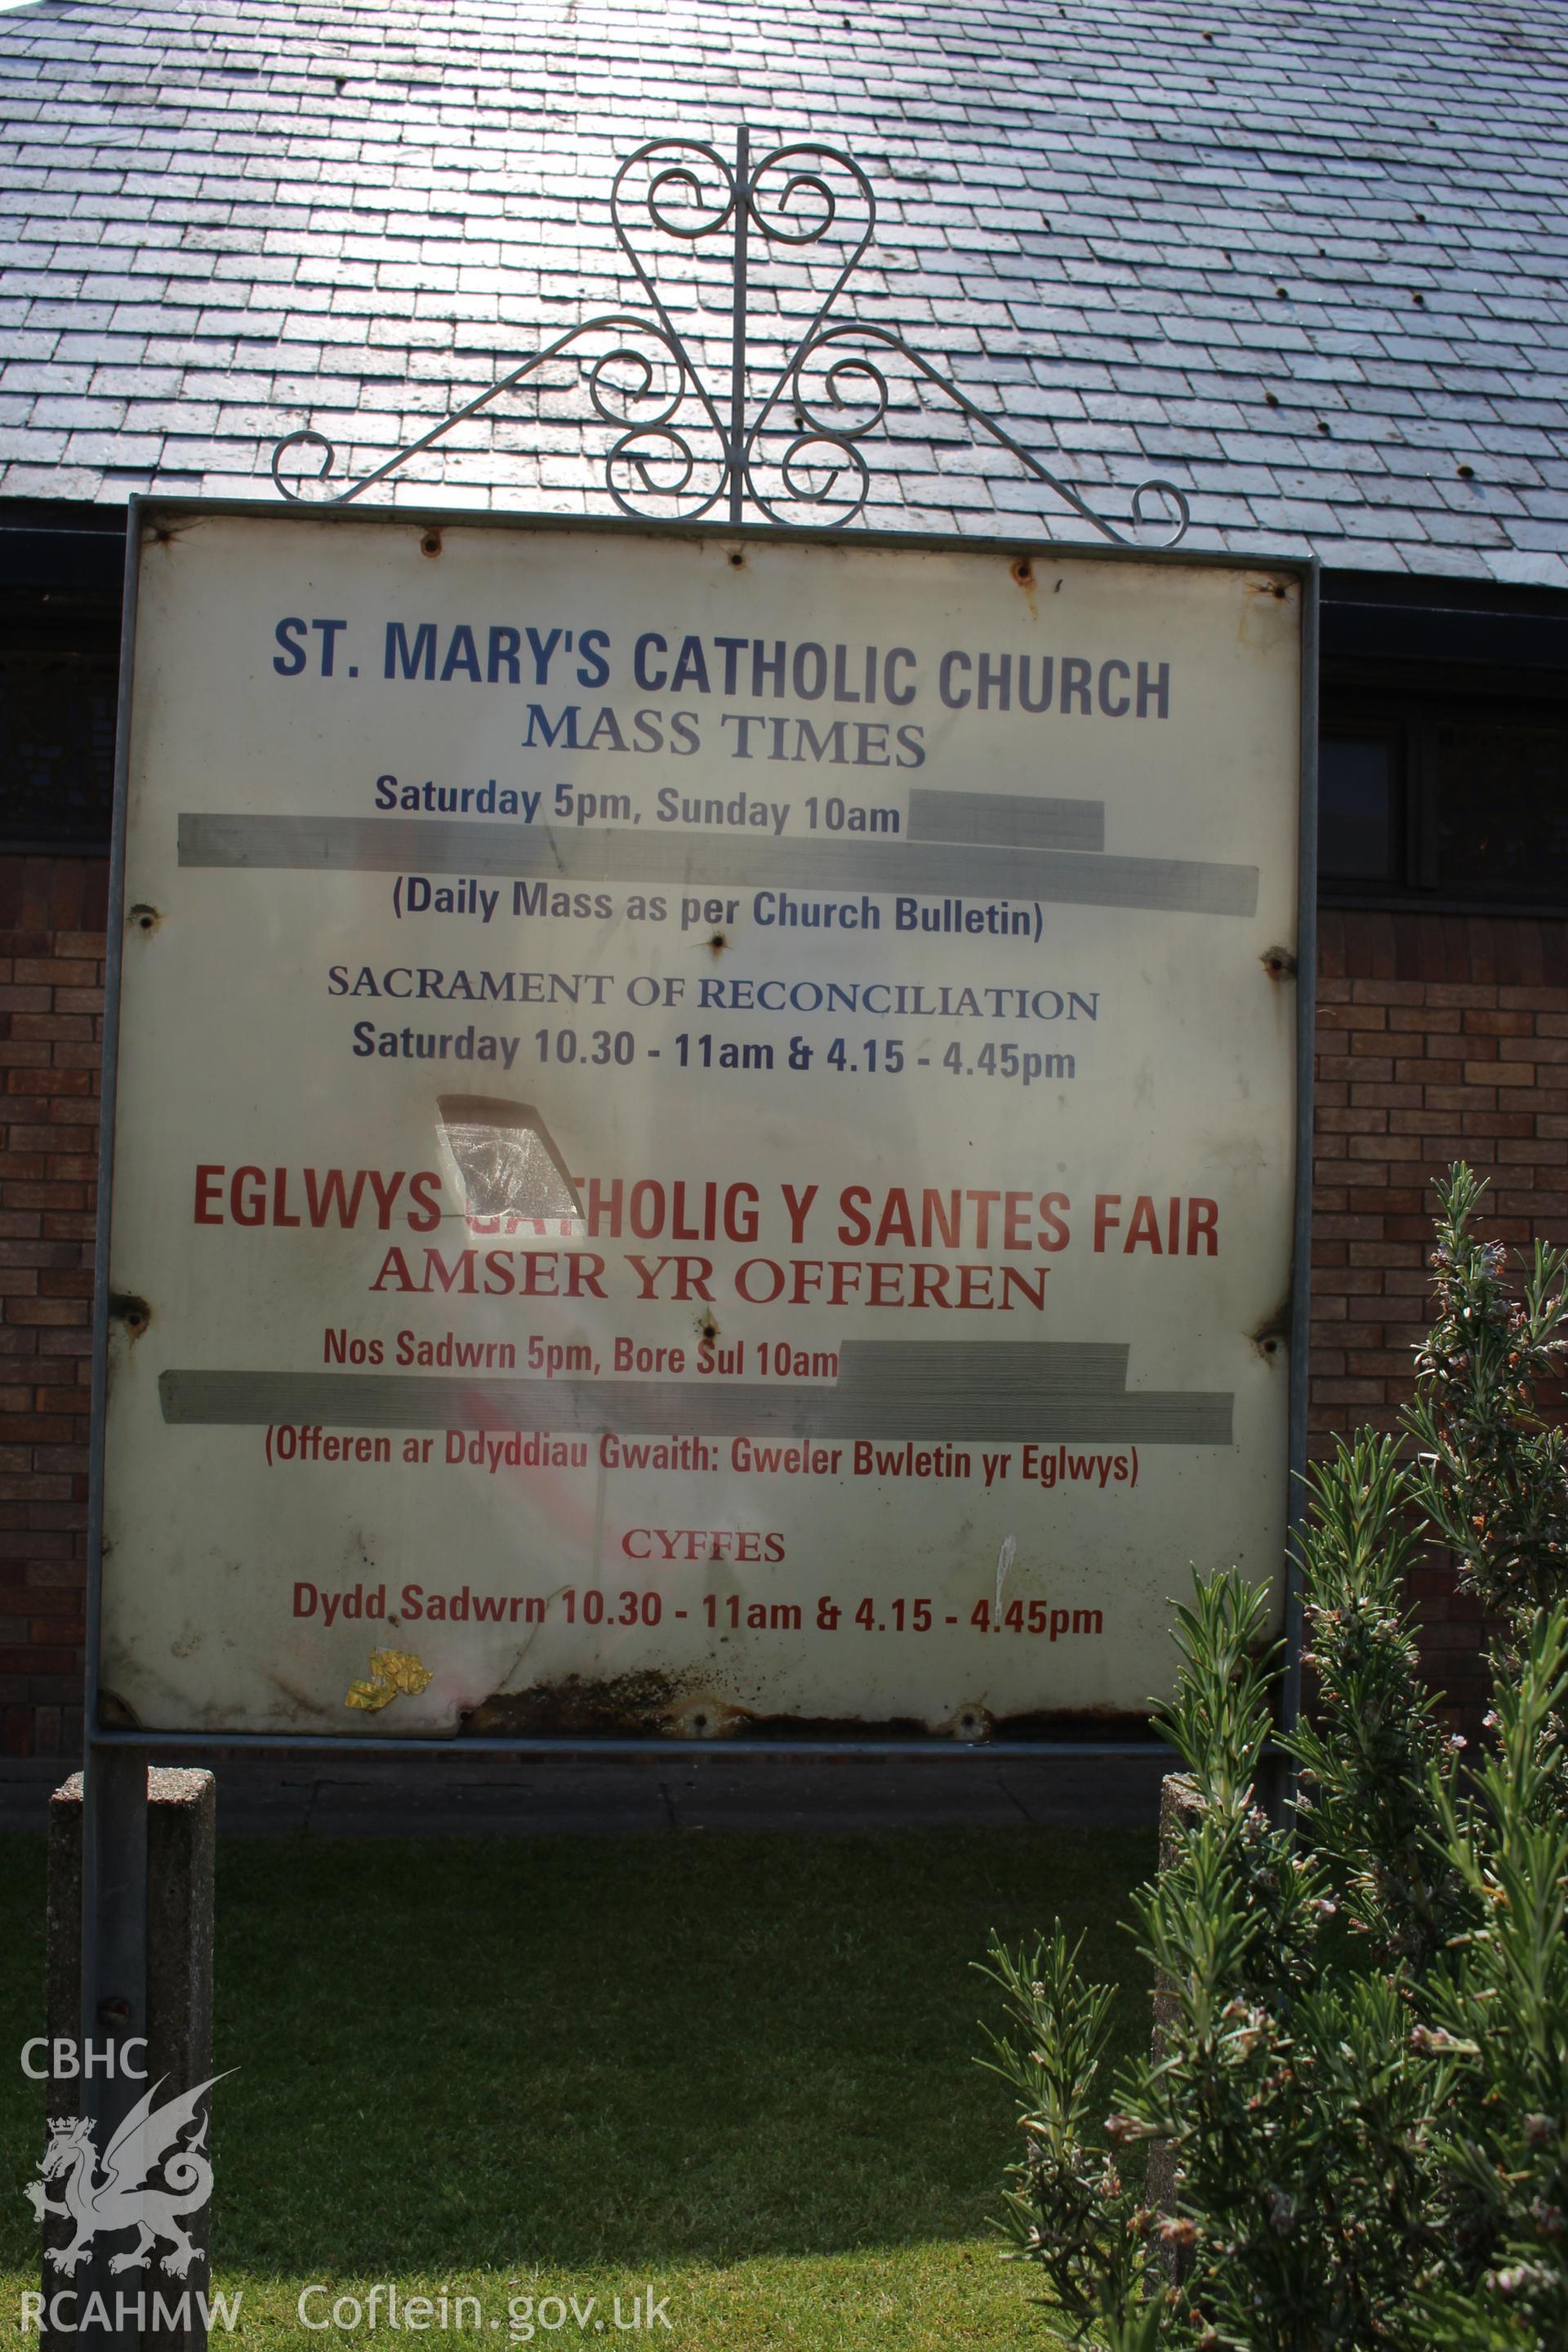 Detailed view of noticeboard showing times of worship at Our Lady of Assumption Catholic Church in Rhyl. Digital photograph taken during survey conducted by Sue Fielding for the RCAHMW, 21st January 2019.